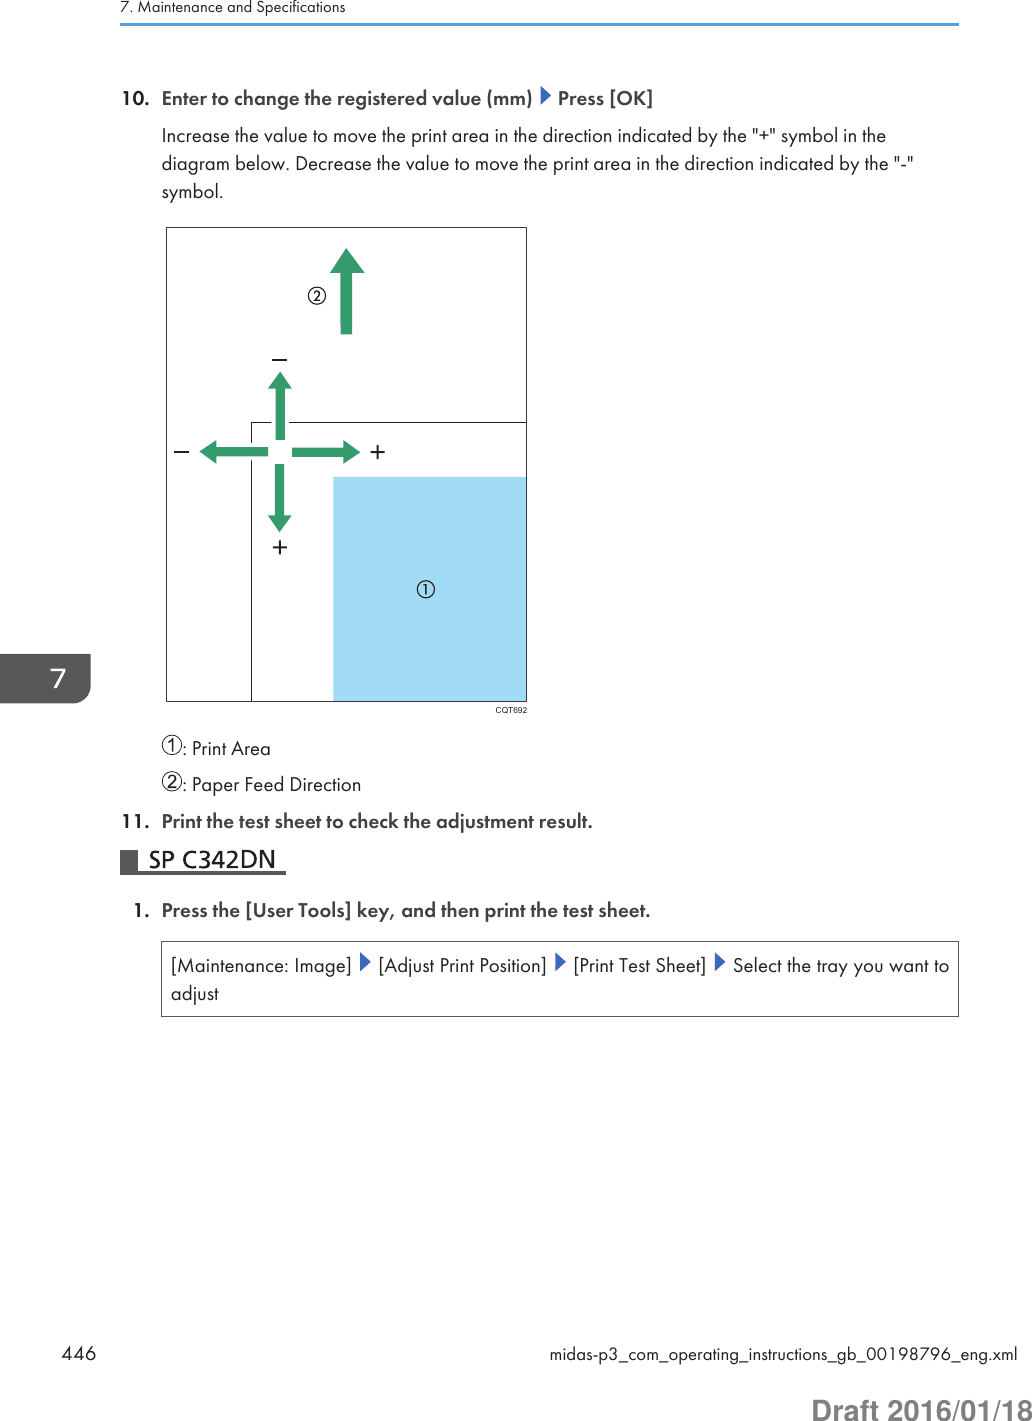 10. Enter to change the registered value (mm)   Press [OK]Increase the value to move the print area in the direction indicated by the &quot;+&quot; symbol in thediagram below. Decrease the value to move the print area in the direction indicated by the &quot;-&quot;symbol.CQT692: Print Area: Paper Feed Direction11. Print the test sheet to check the adjustment result.1. Press the [User Tools] key, and then print the test sheet.[Maintenance: Image]   [Adjust Print Position]   [Print Test Sheet]   Select the tray you want toadjust7. Maintenance and Specifications446 midas-p3_com_operating_instructions_gb_00198796_eng.xmlDraft 2016/01/18